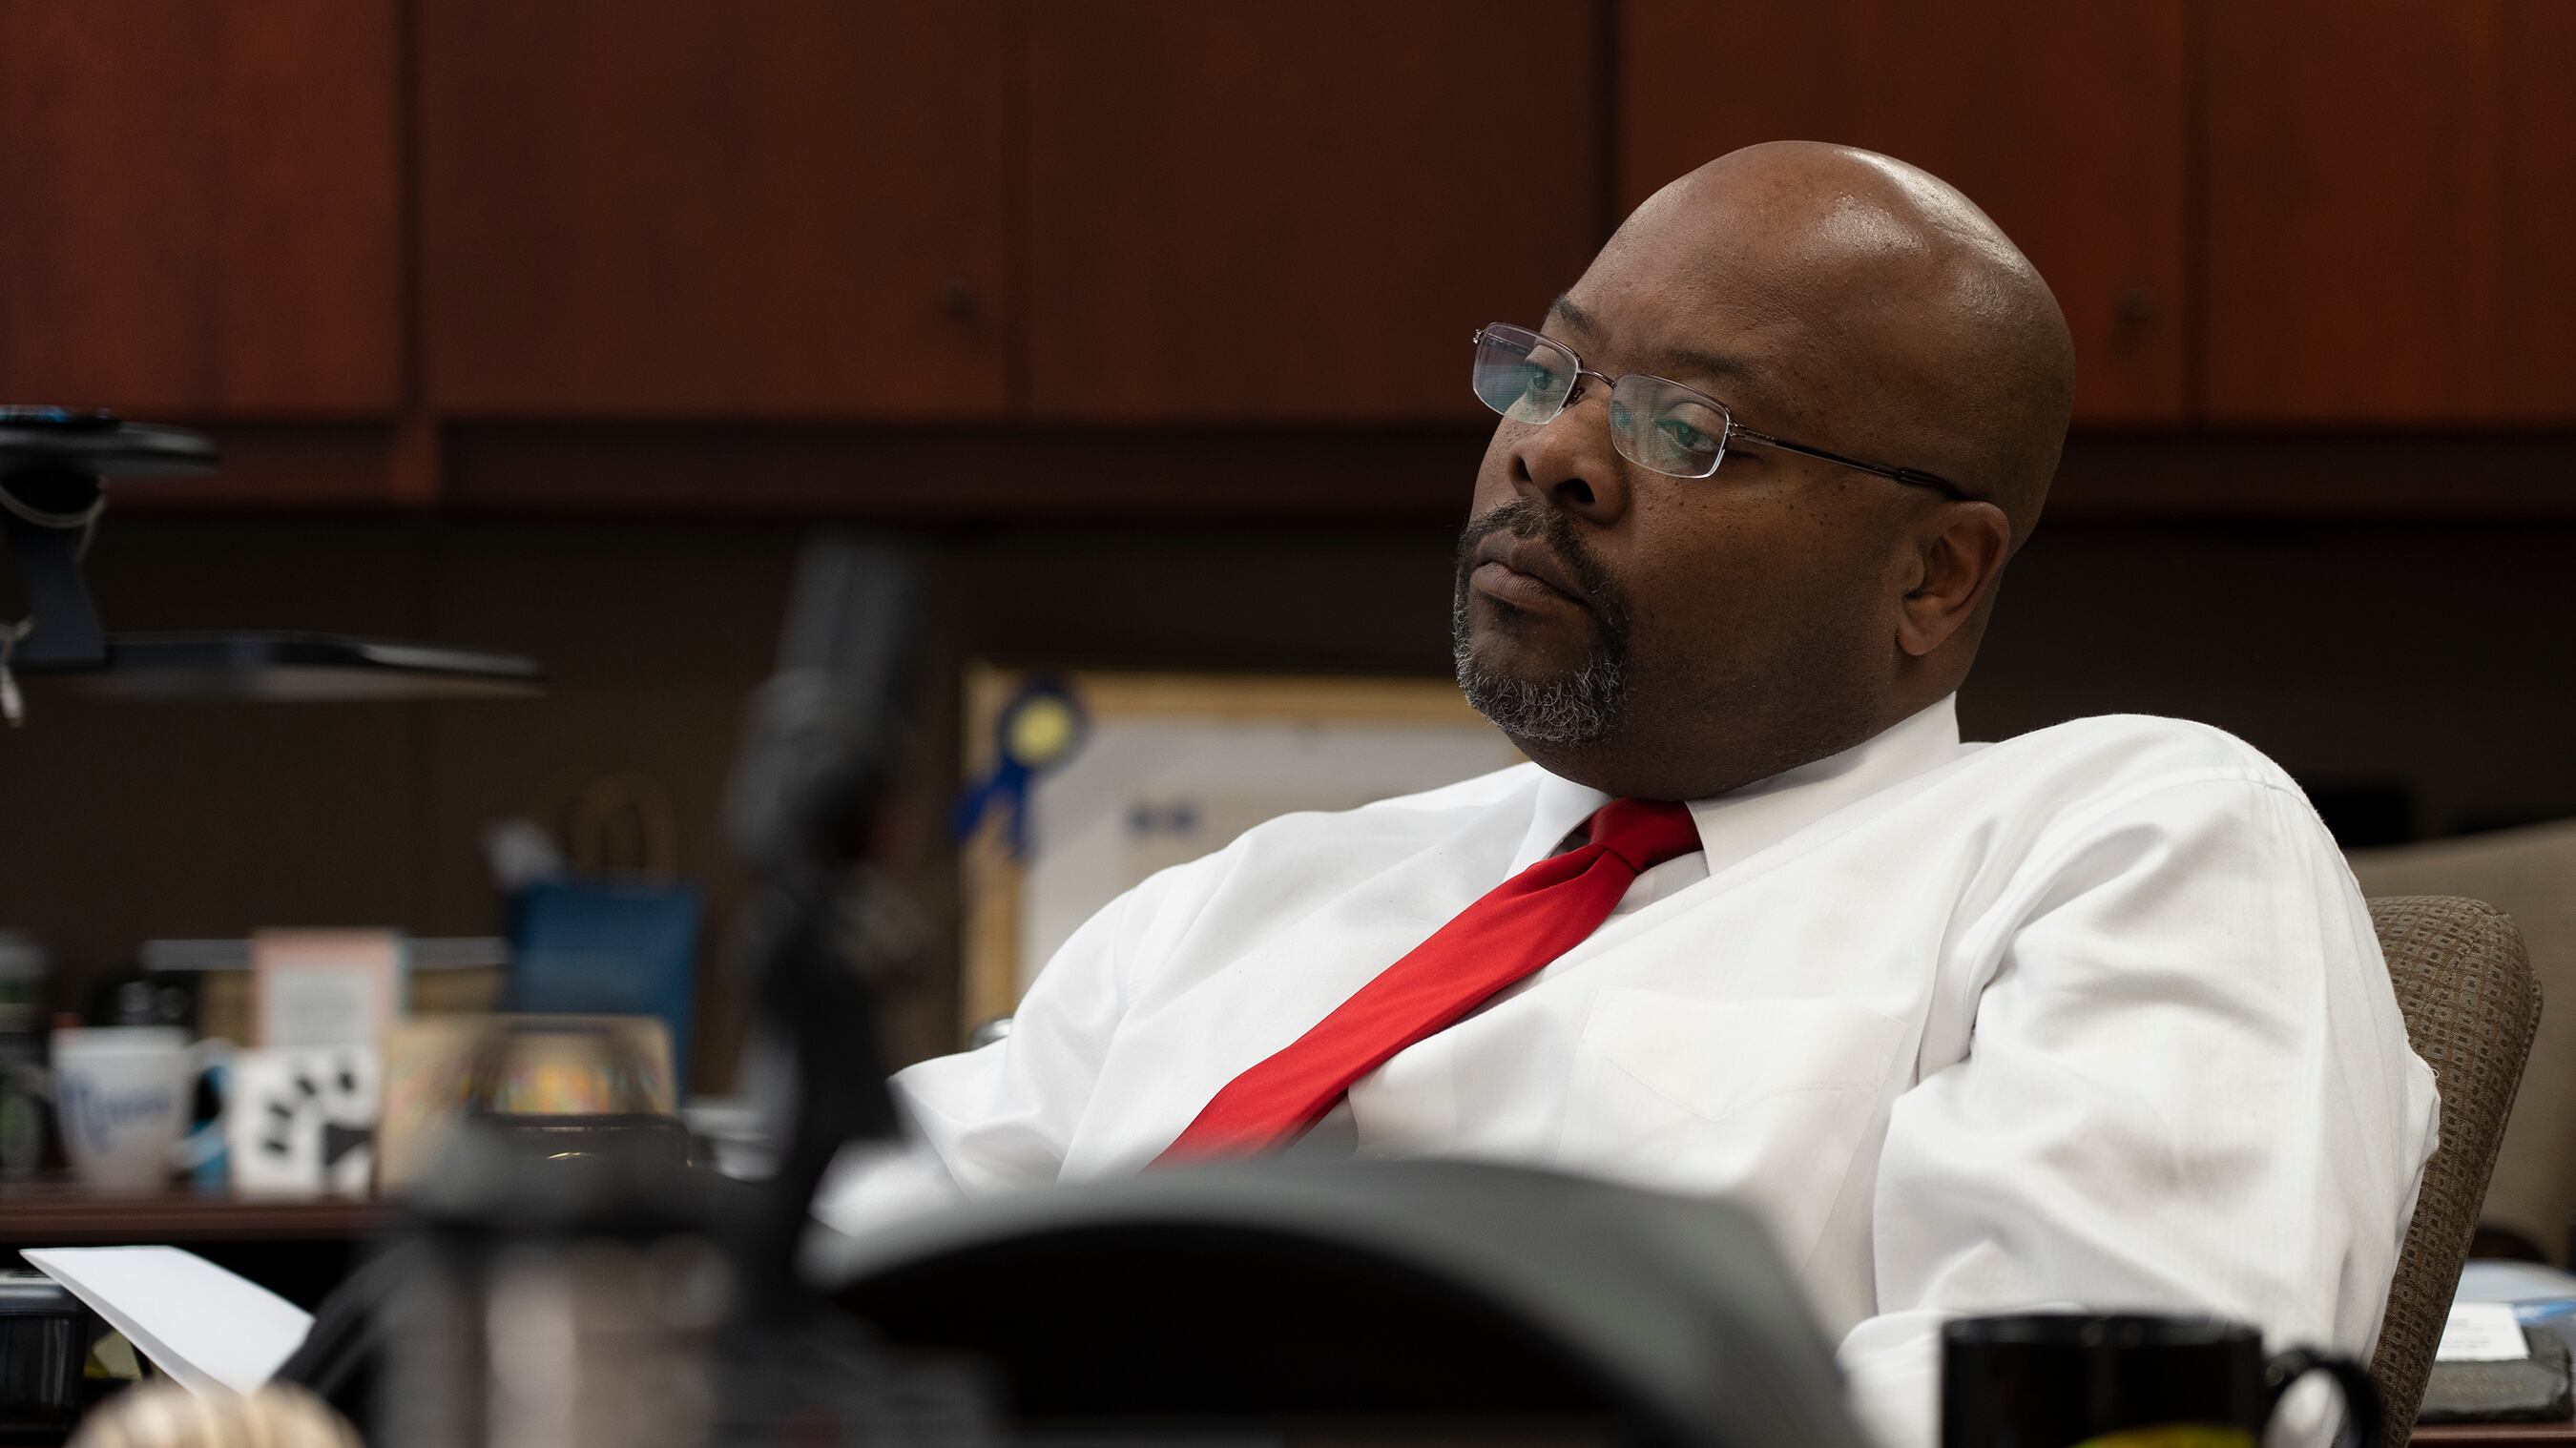 Aurora Superintendent Rico Munn, wearing a white dress shirt and red tie, leans back in his chair and appears to be listening intently to someone or something. His face is serious.